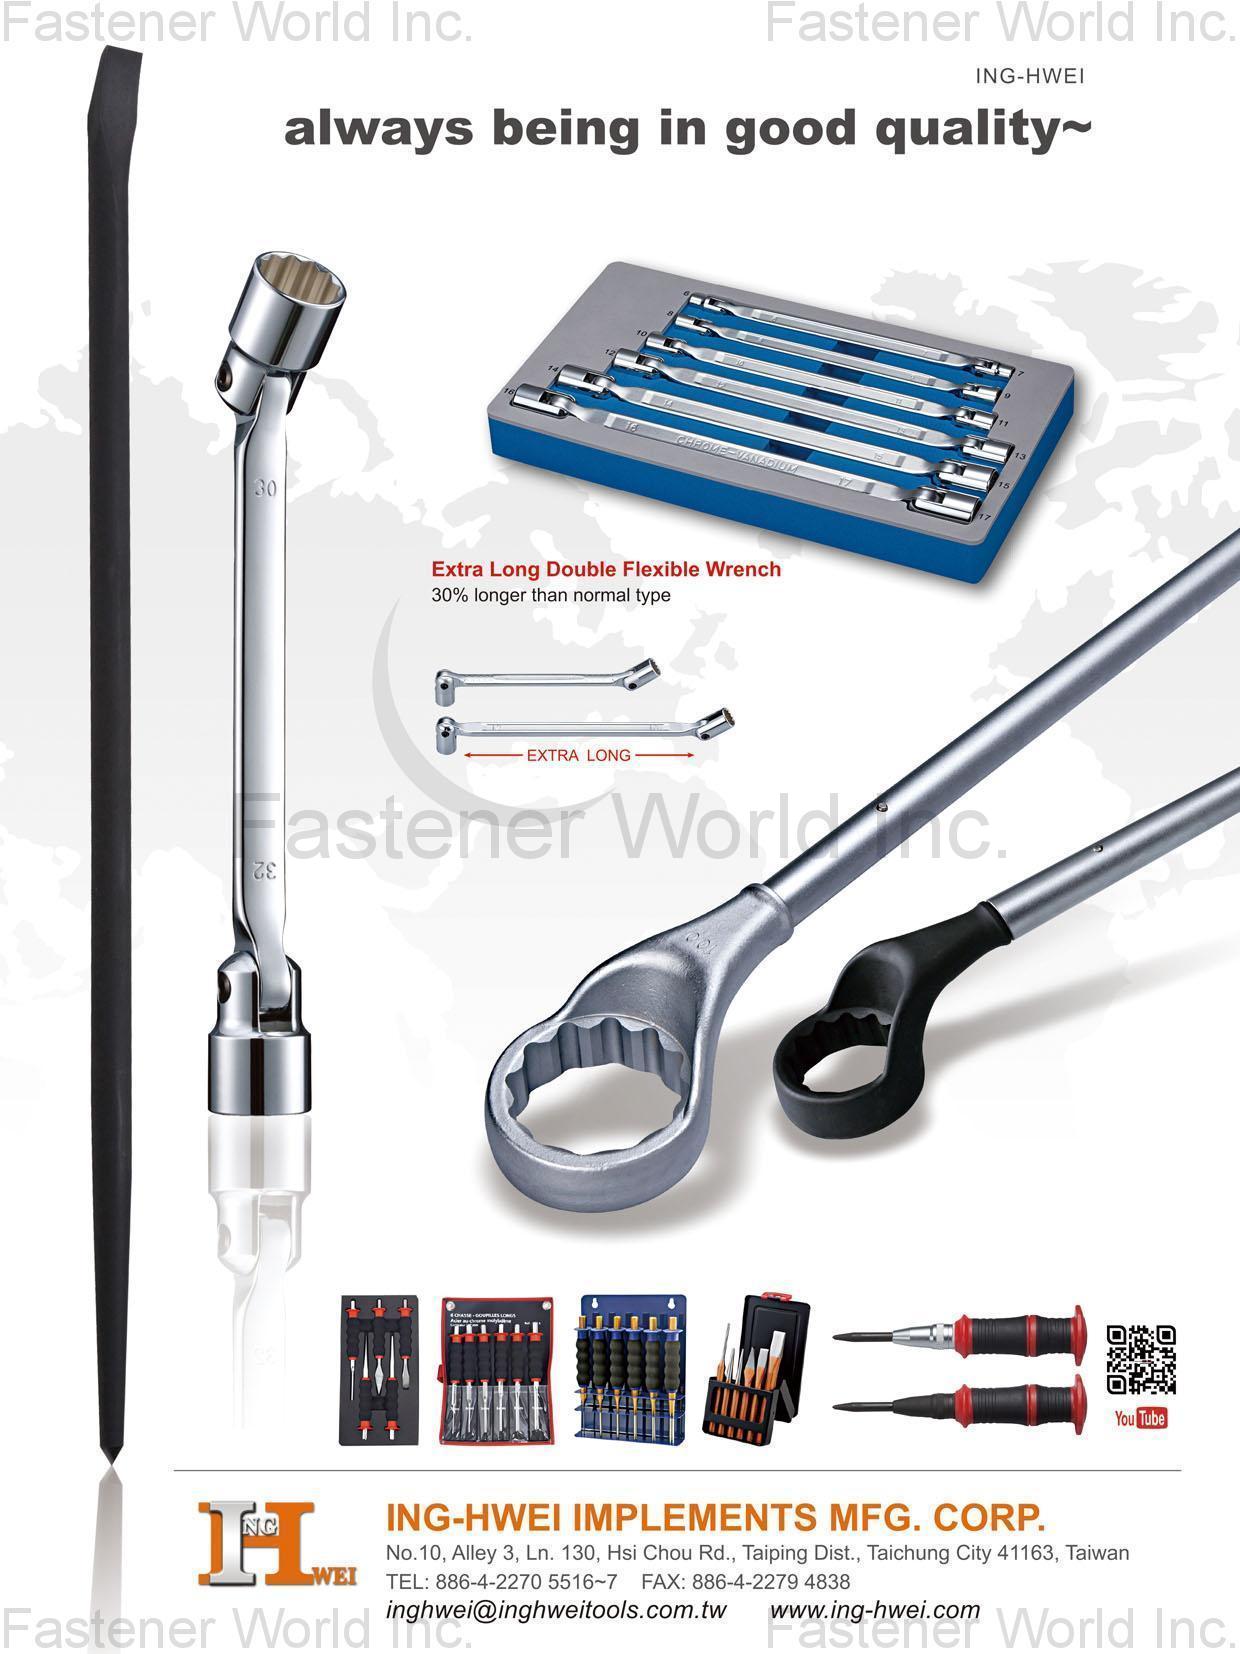 ING-HWEI IMPLEMENTS MFG. CORP. , SOCKETS & WRENCHS, PUNCH & CHISEL, TOOL SETS , Socket Wrench Sets & Sockets